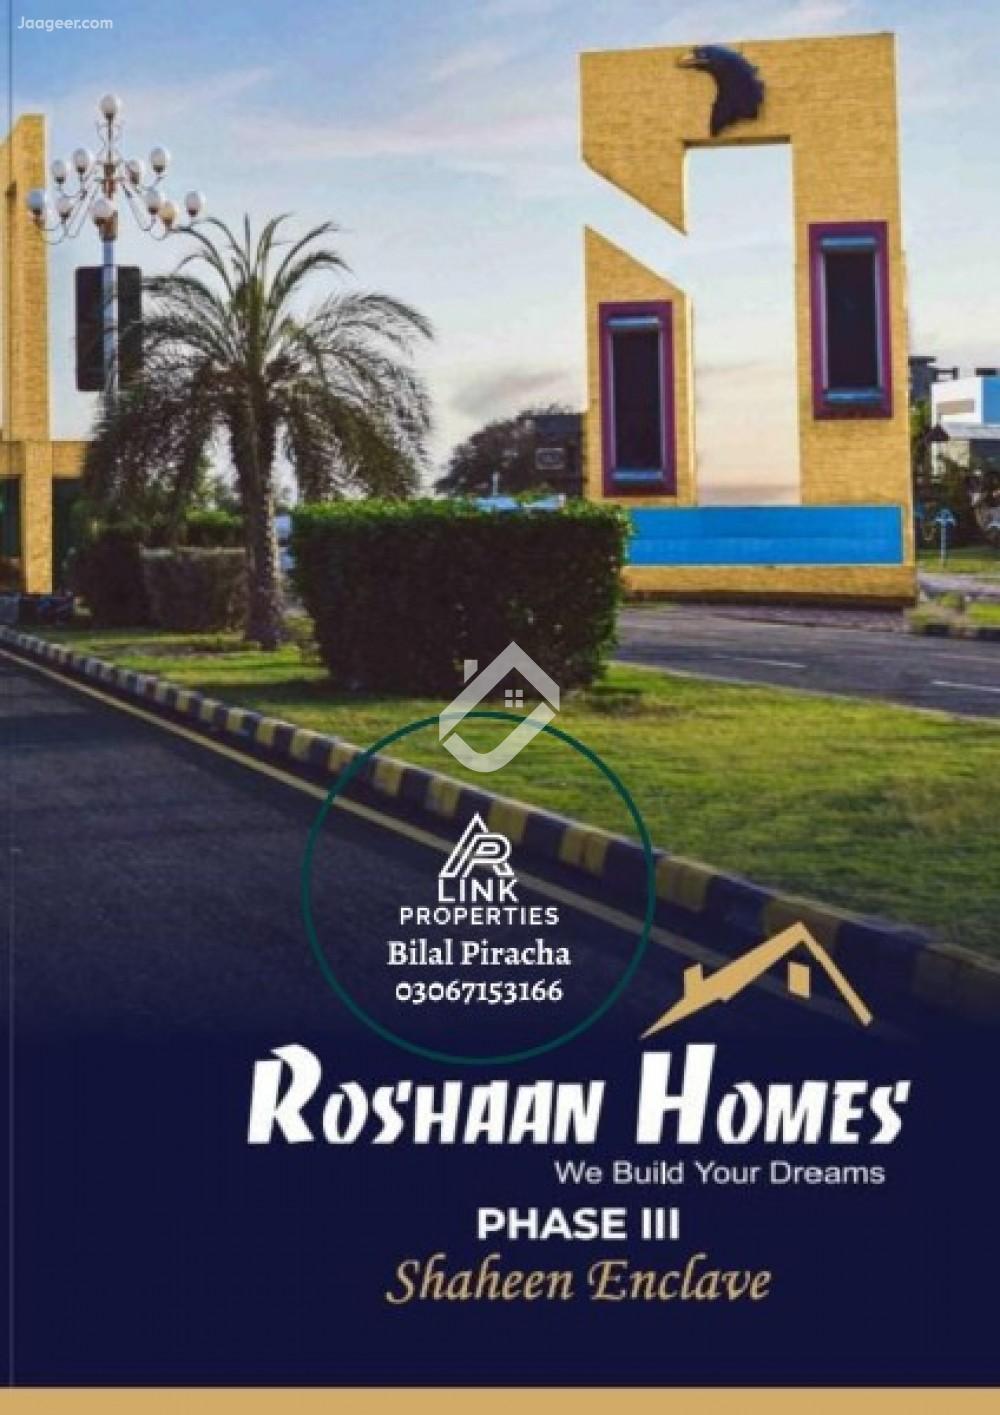 View  7 Marla Residential Plot is available on Installment in Roshan Homes Phase 3, Shaheen Enclave Sargodha in Shaheen Enclave, Sargodha